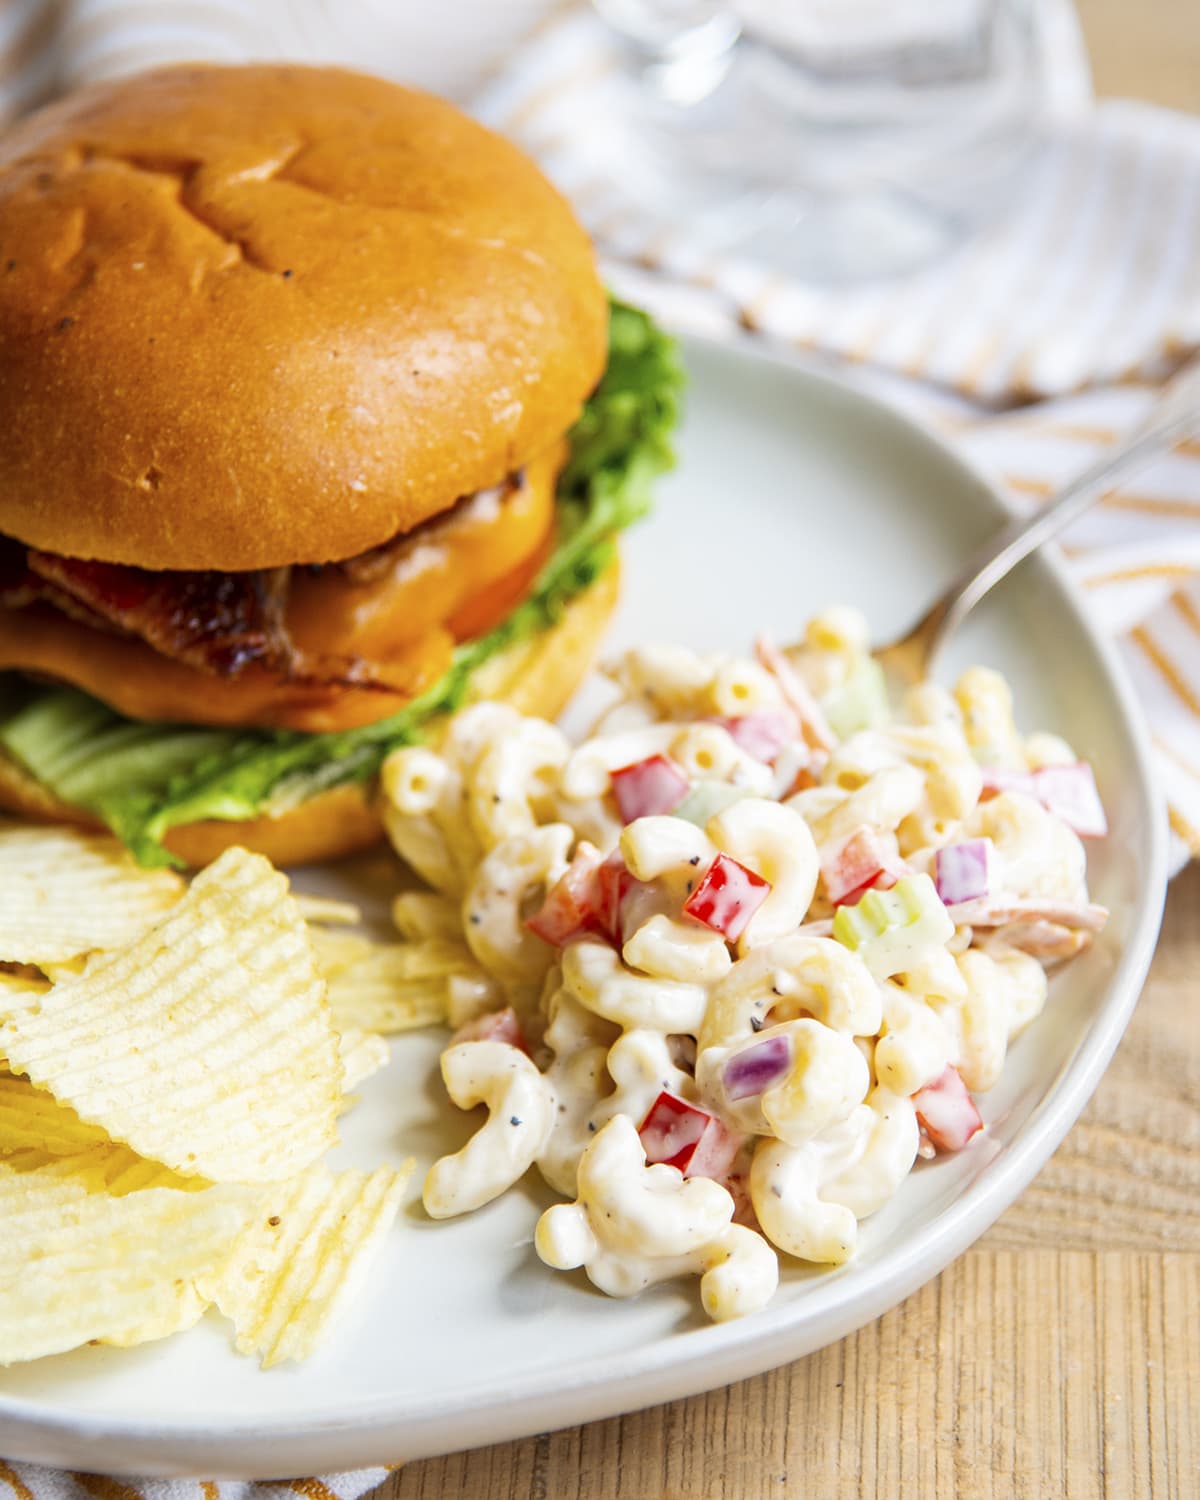 A plate of macaroni salad, chips, and a burger.